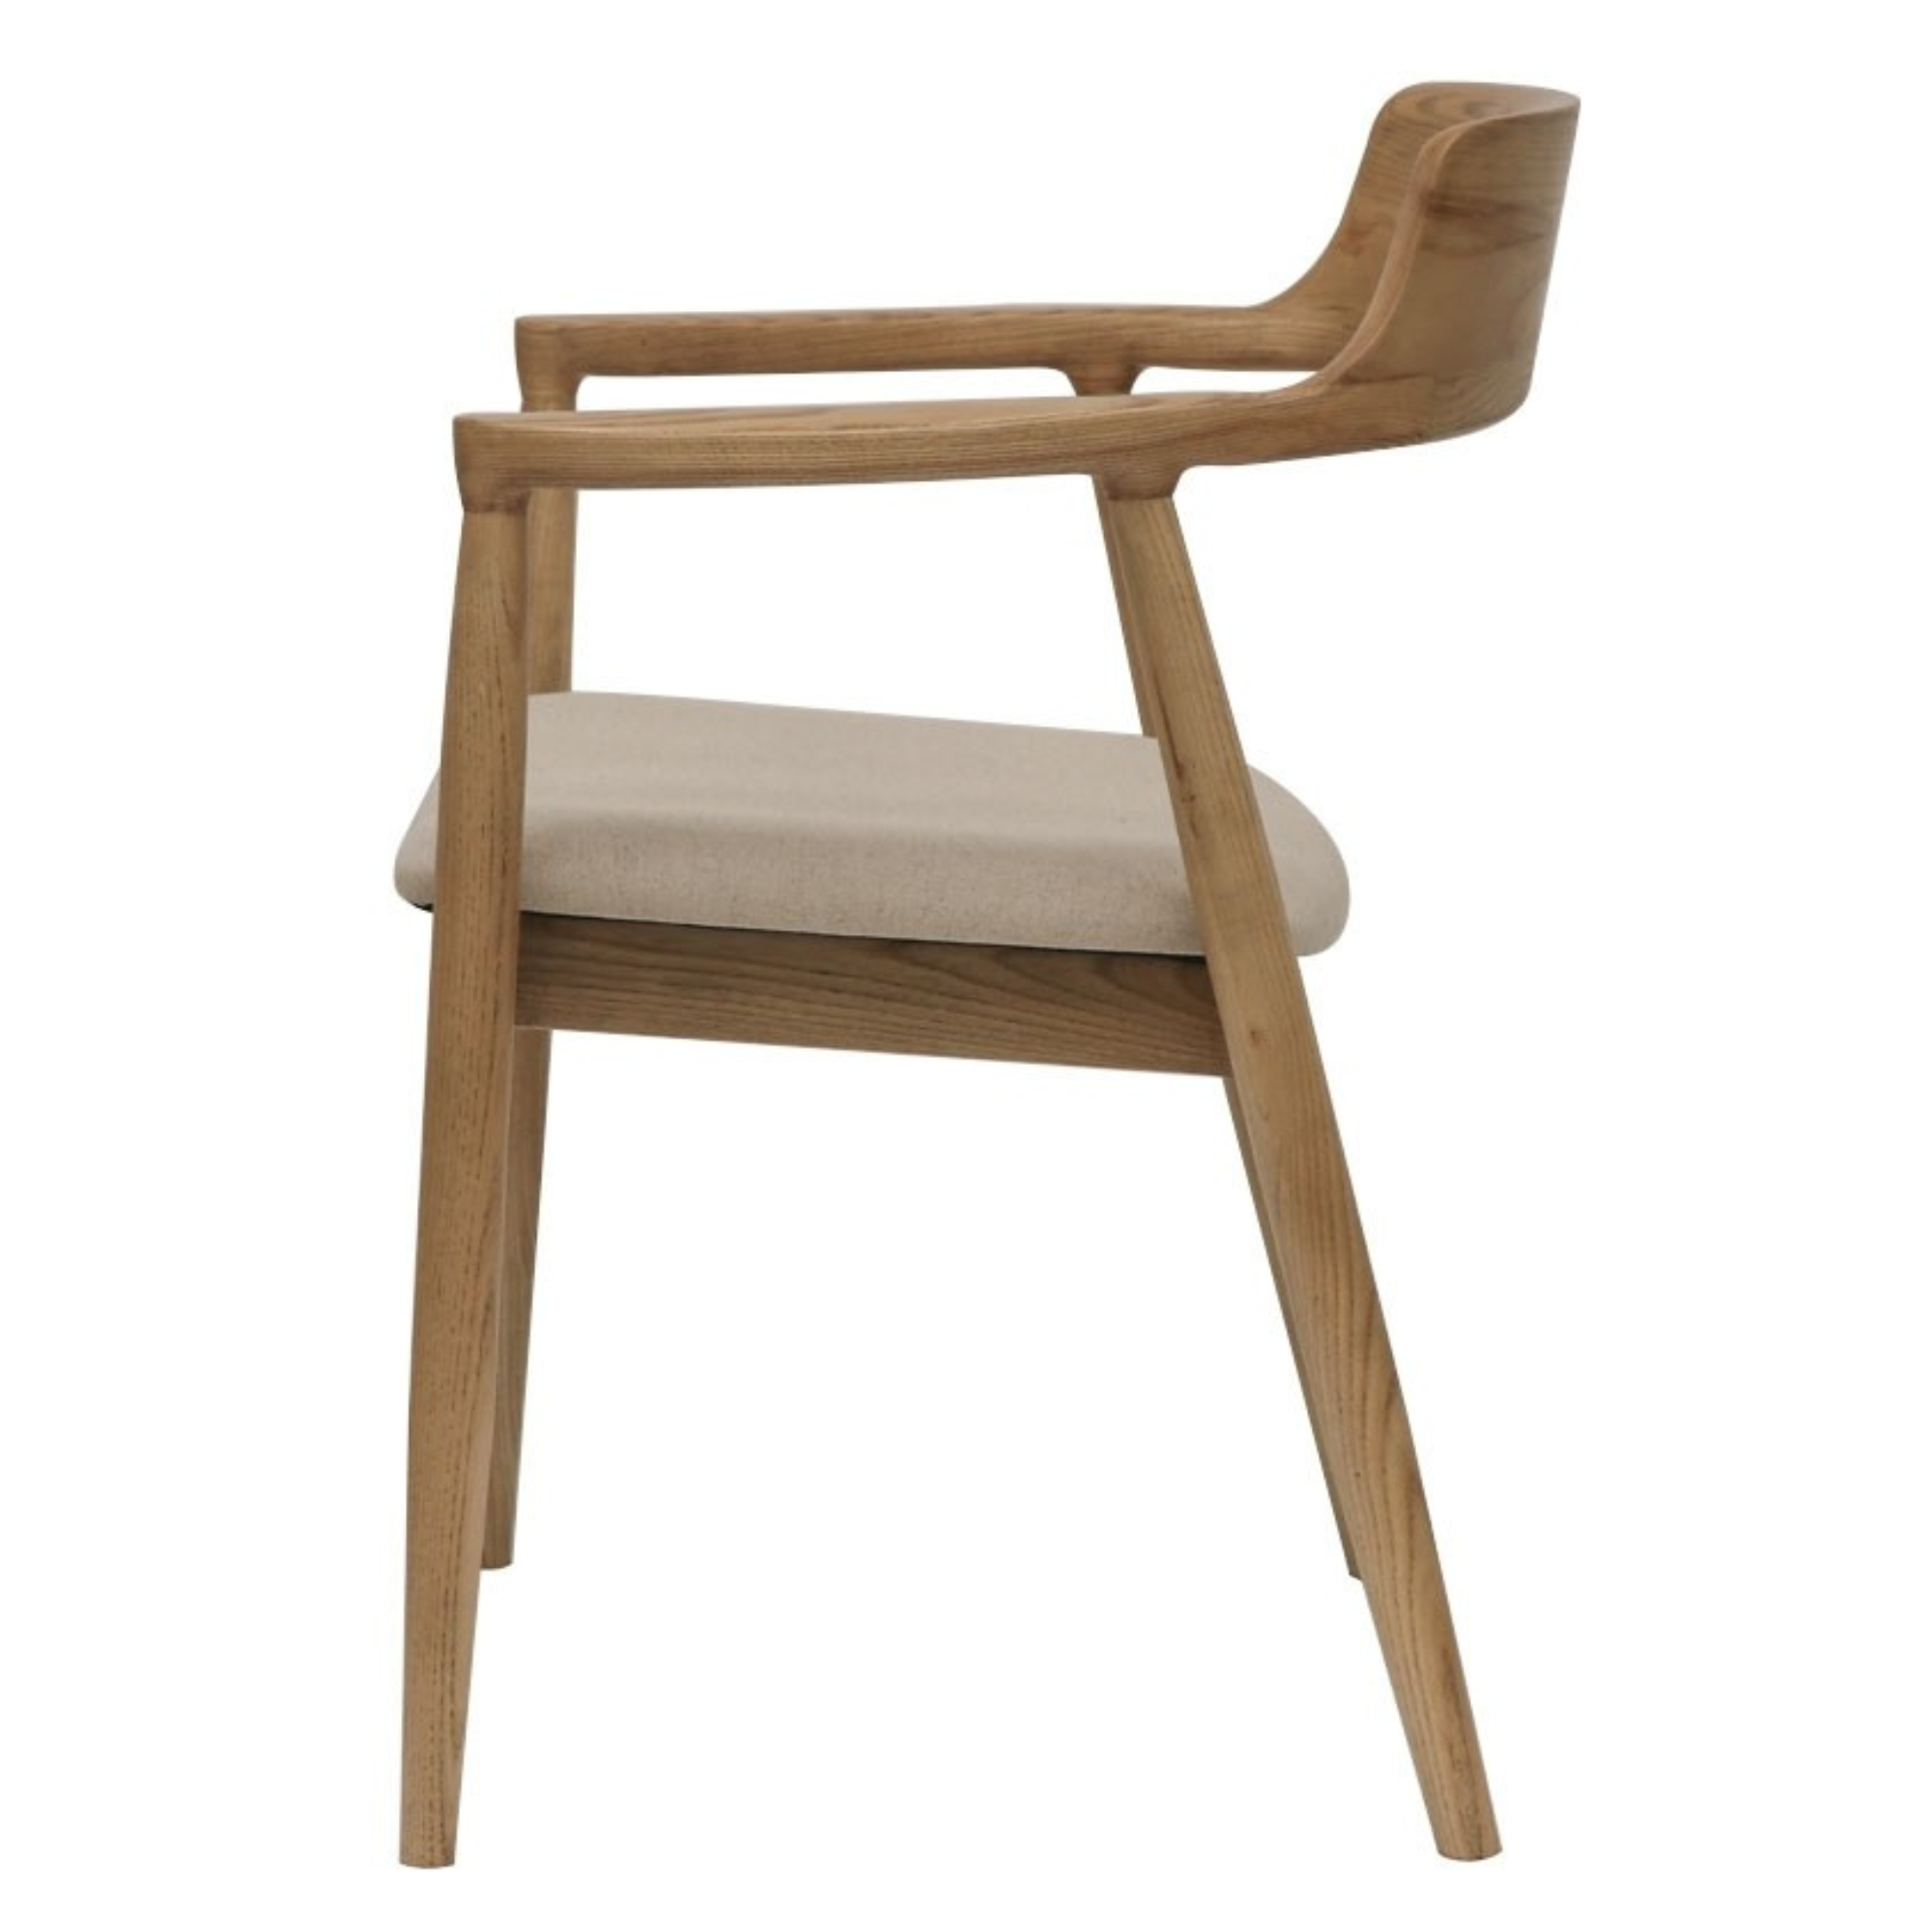 EALING DINING CHAIR | NATURAL LINEN LOOK SEAT